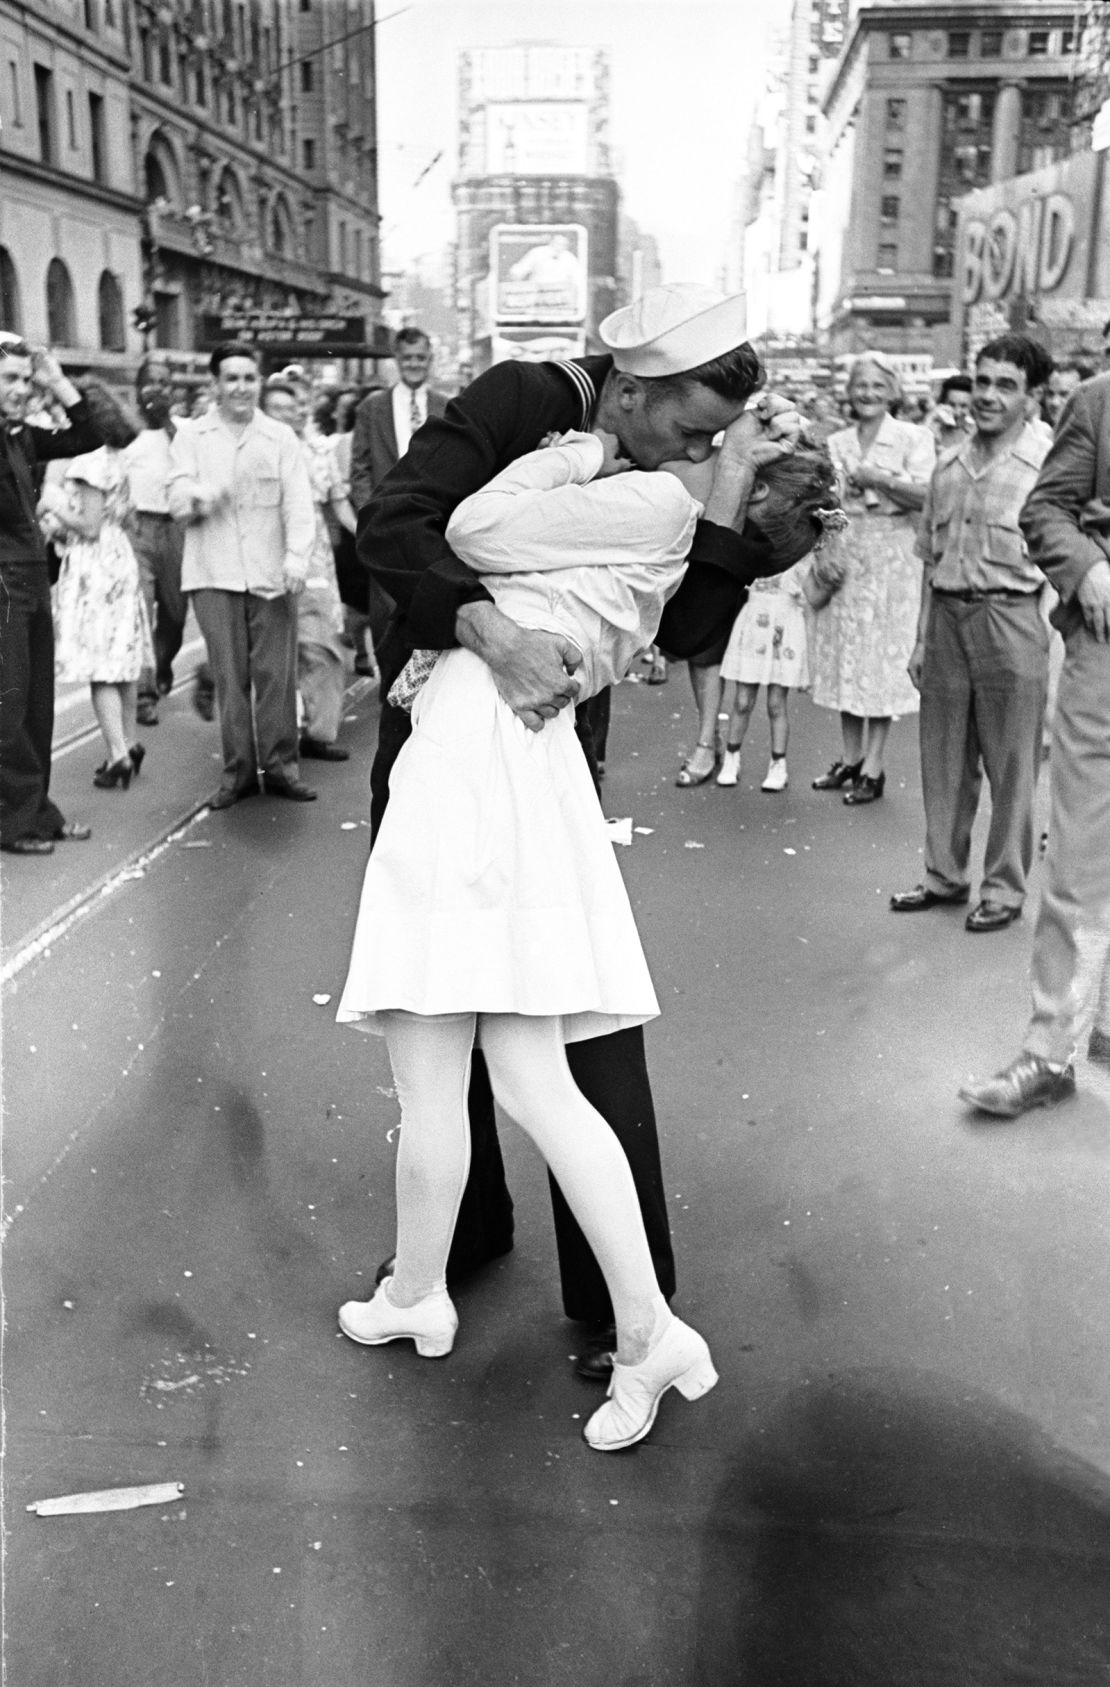 The V-J Day Kiss has become an enduring symbol in popular culture.